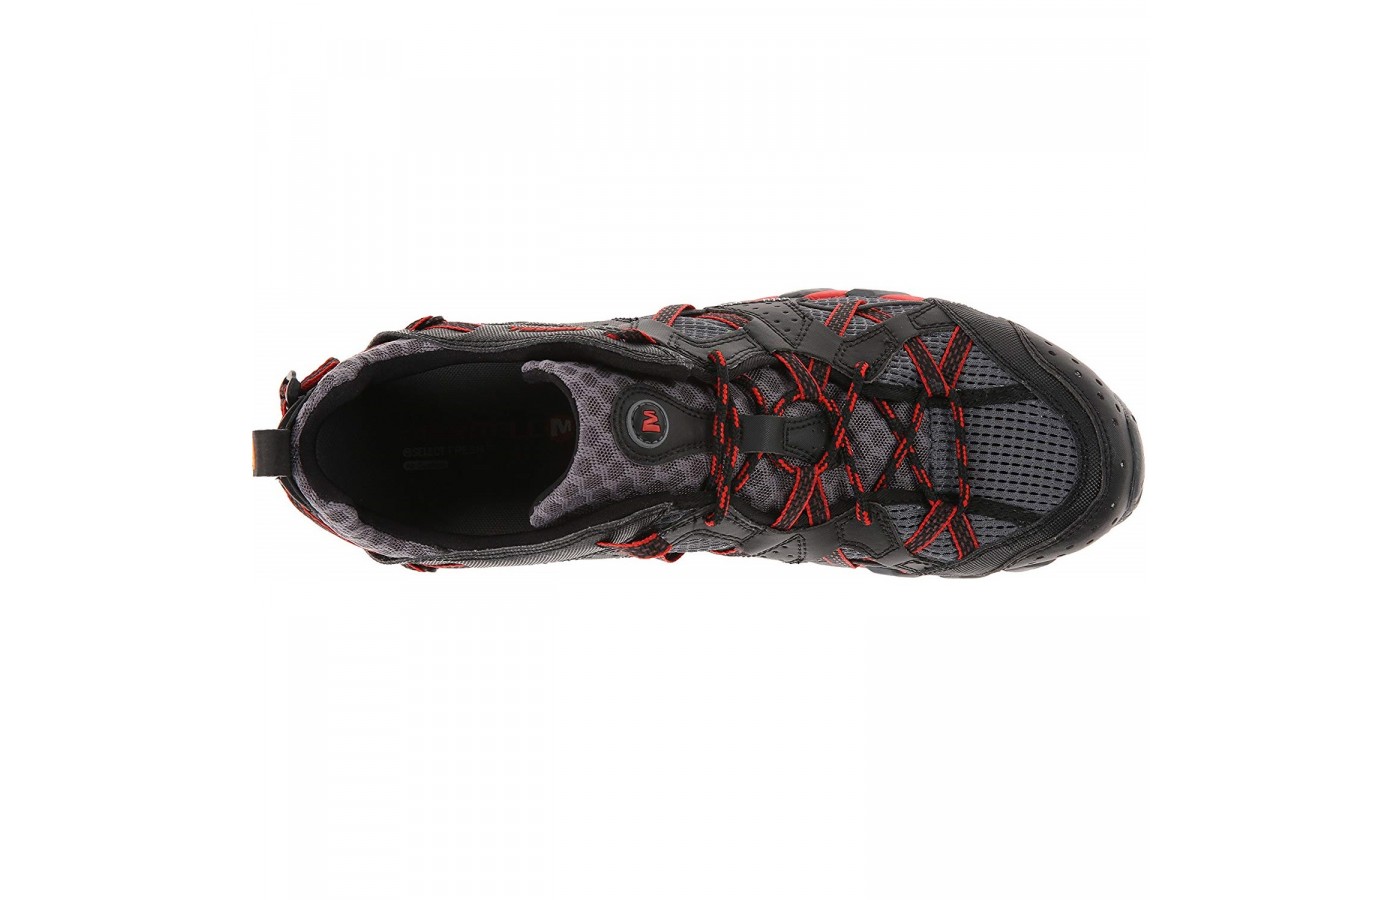 The Merrell Waterpro Maipo offers integrated webbed lacing for a more secure fit. 